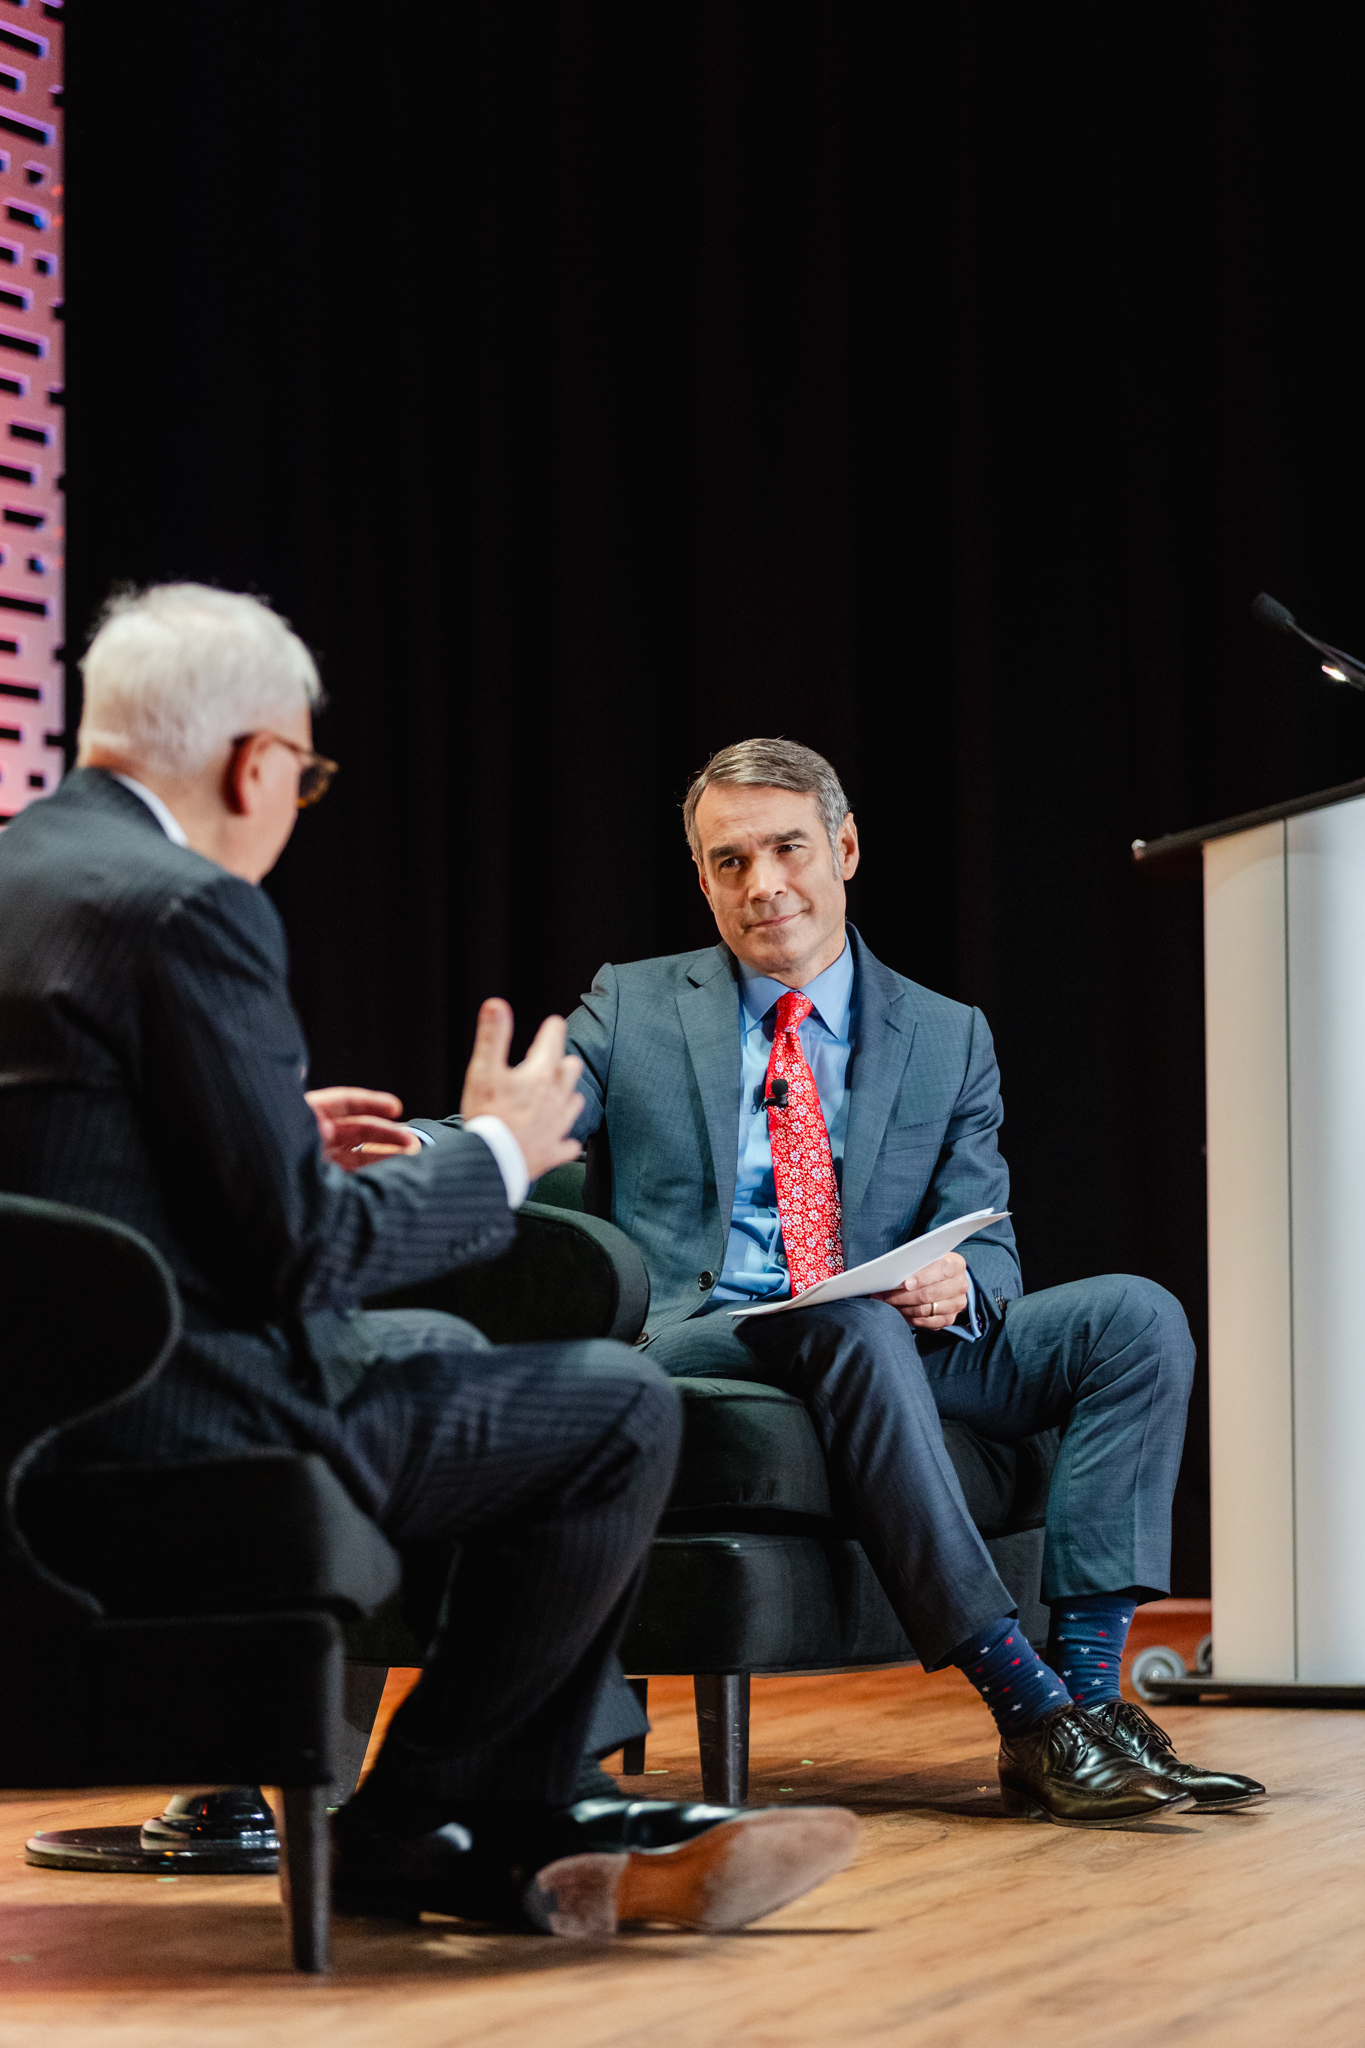 Conference photography of two men in suits engaging in conversation on stage.